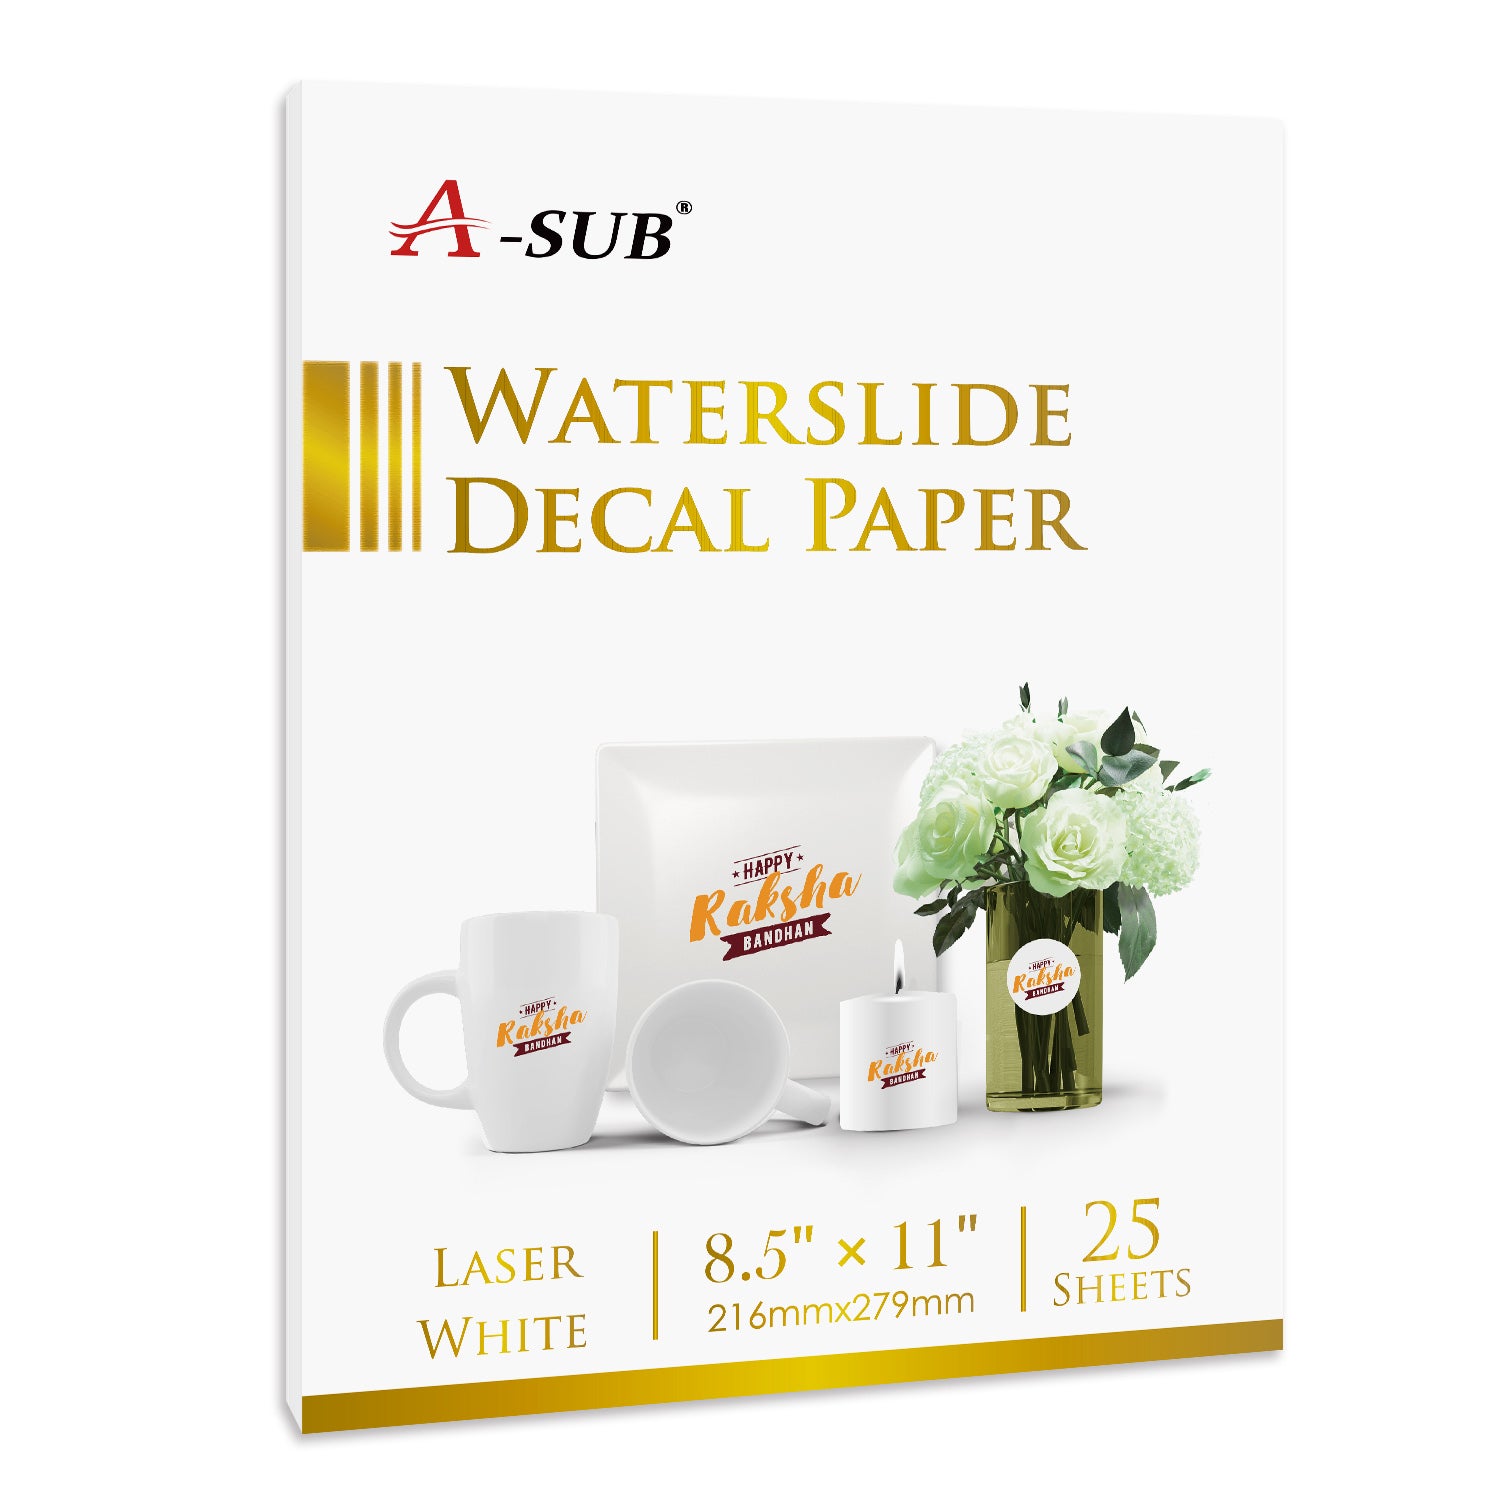 8.5"x11" Waterslide Decal White Laser 25 Sheets